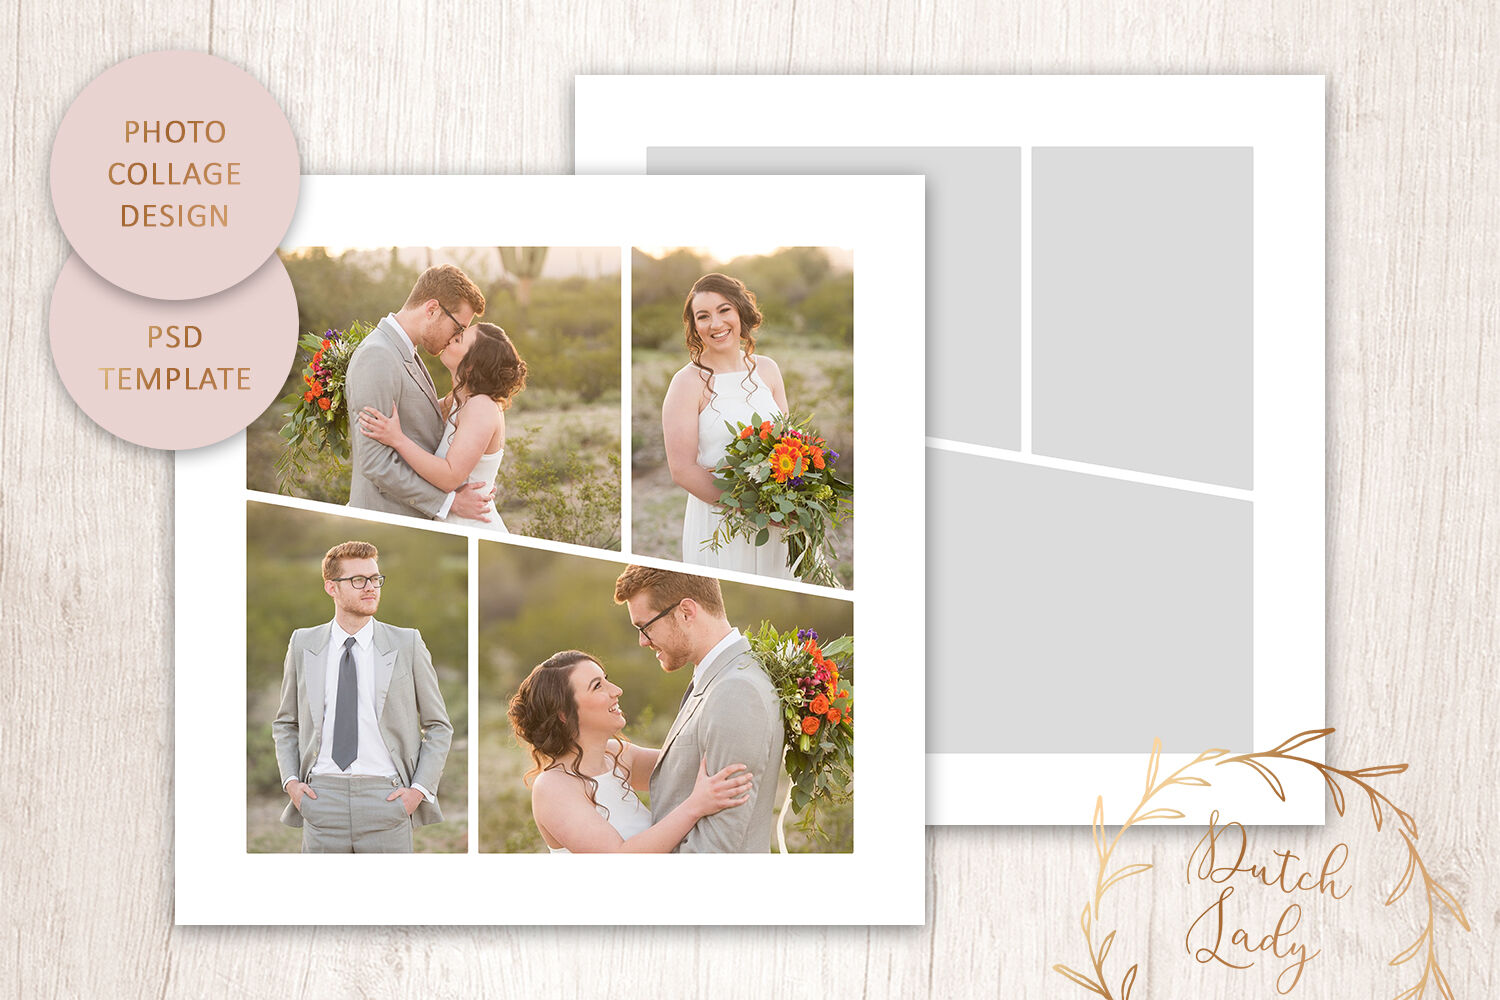 PSD Photo Collage Template By The Dutch Lady Designs TheHungryJPEG